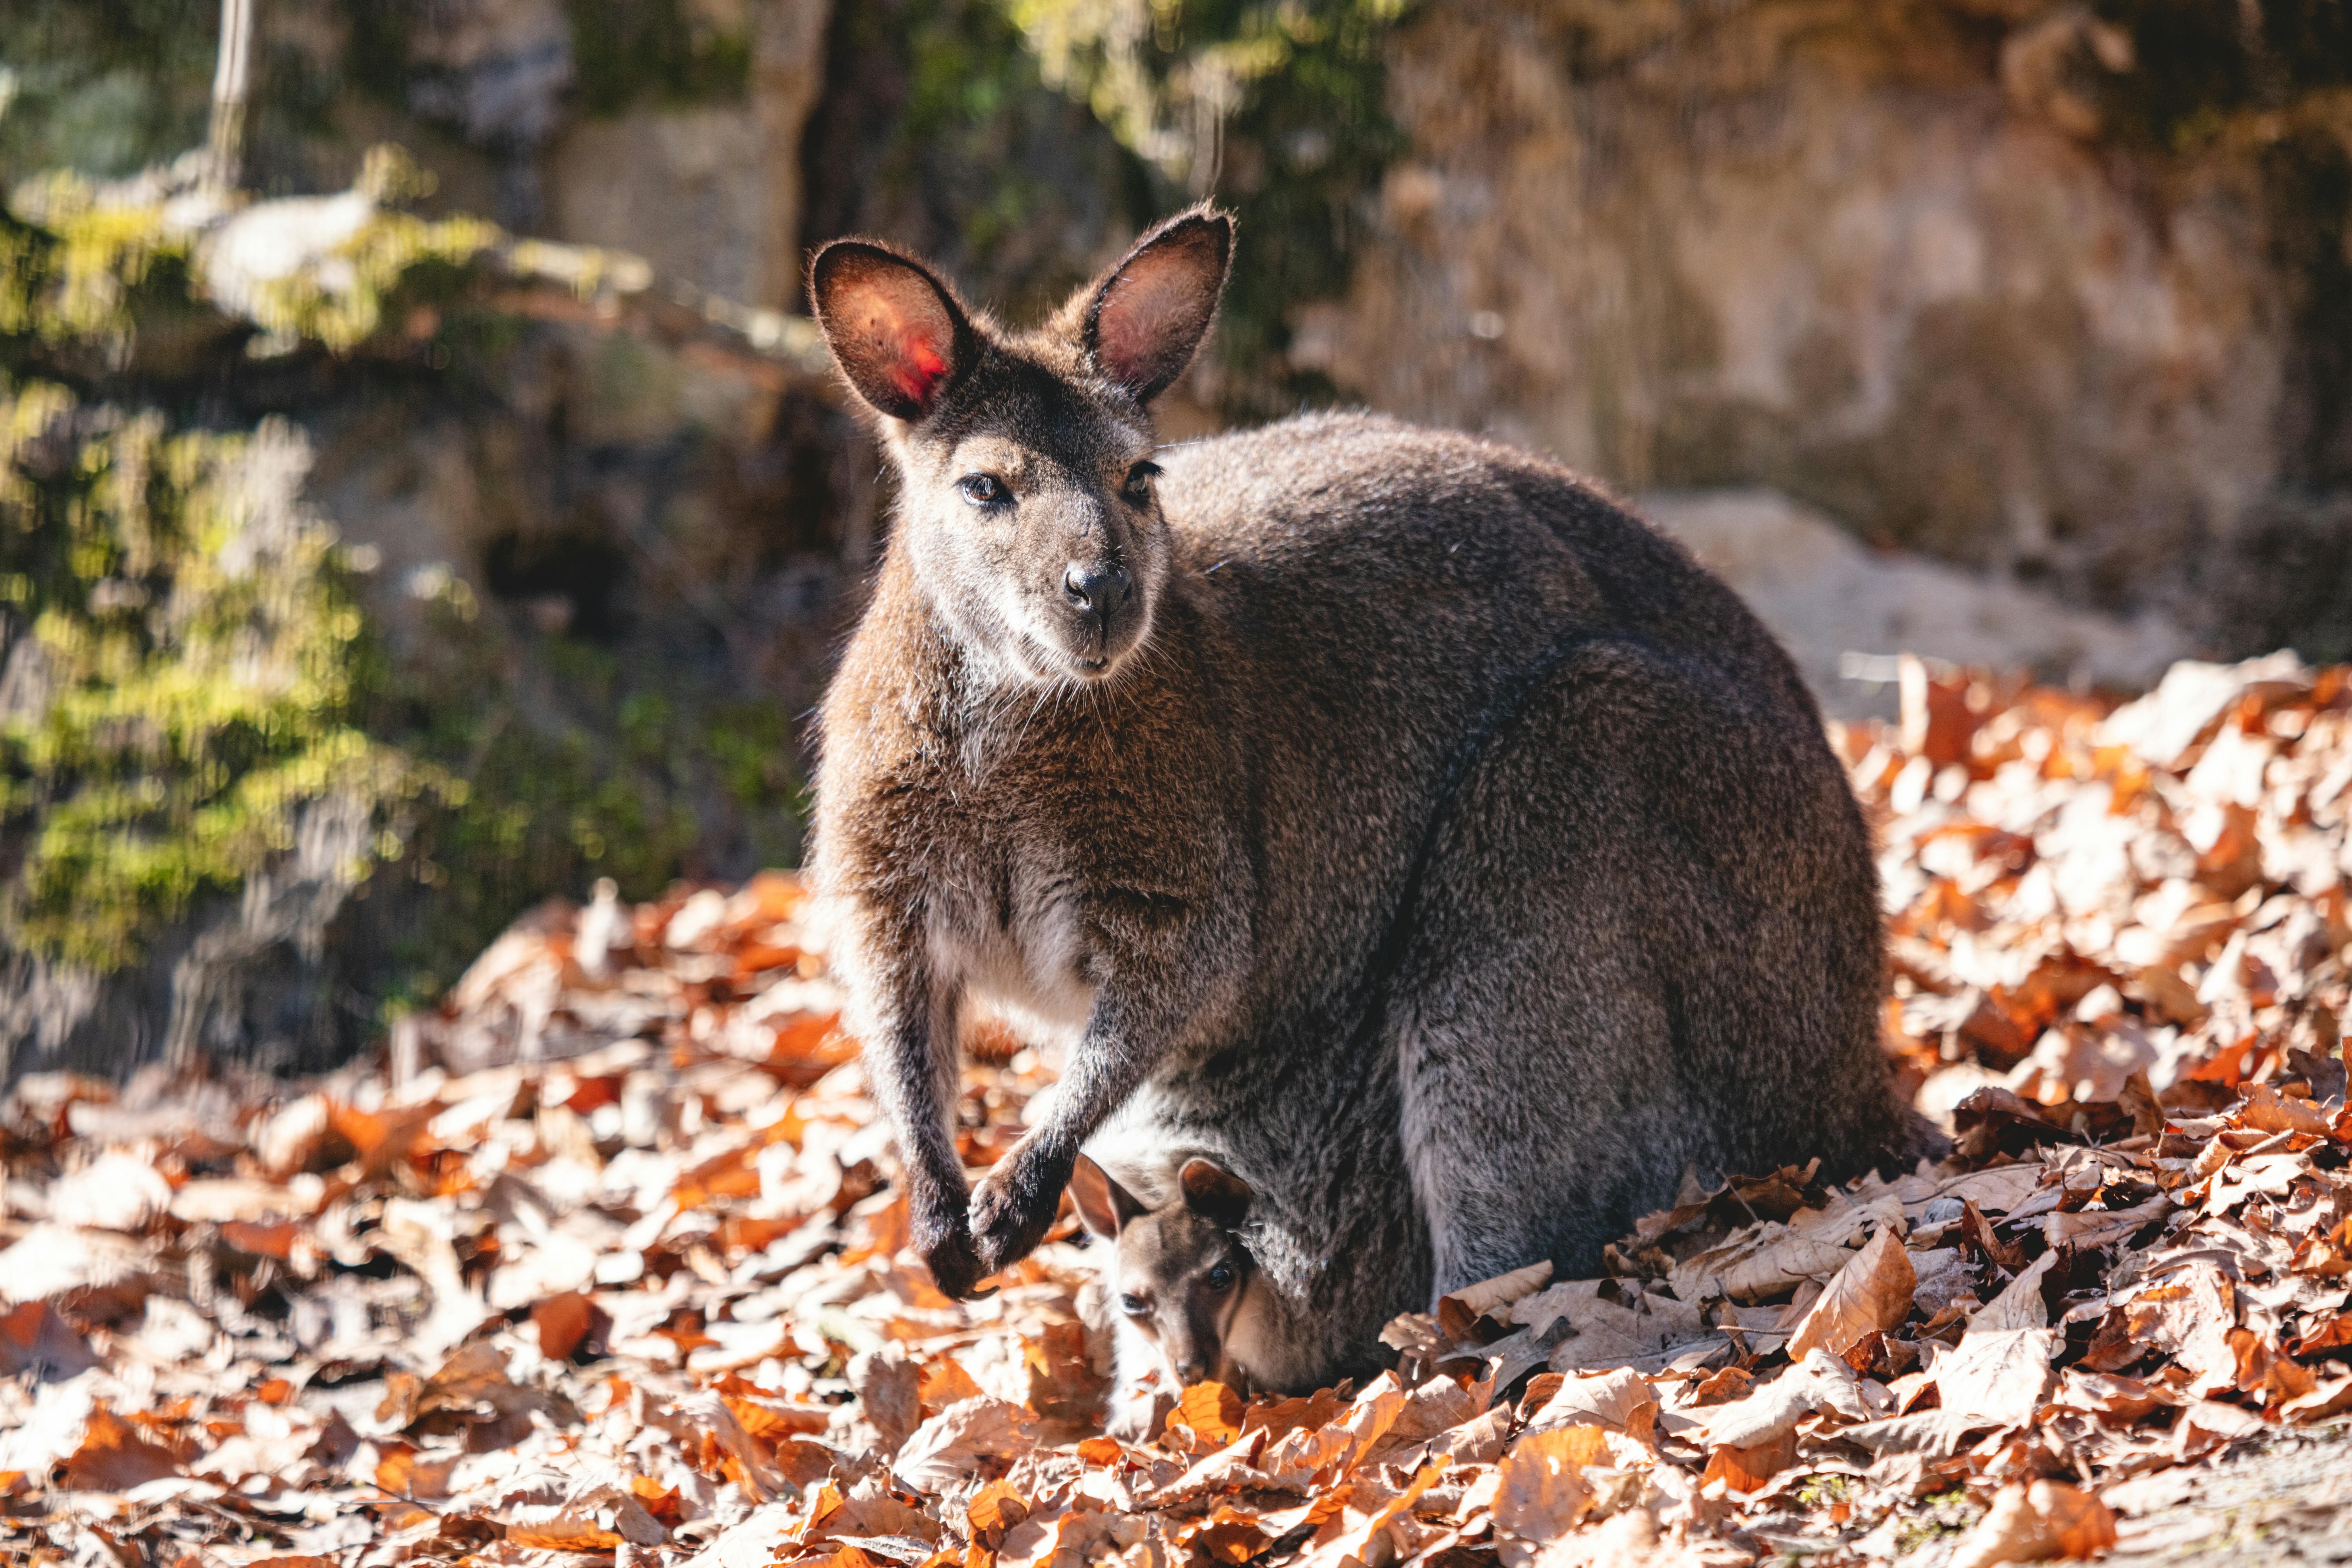 red-necked-wallaby-with-joey-in-a-pouch-2022-10-24-21-59-47-utc.jpg